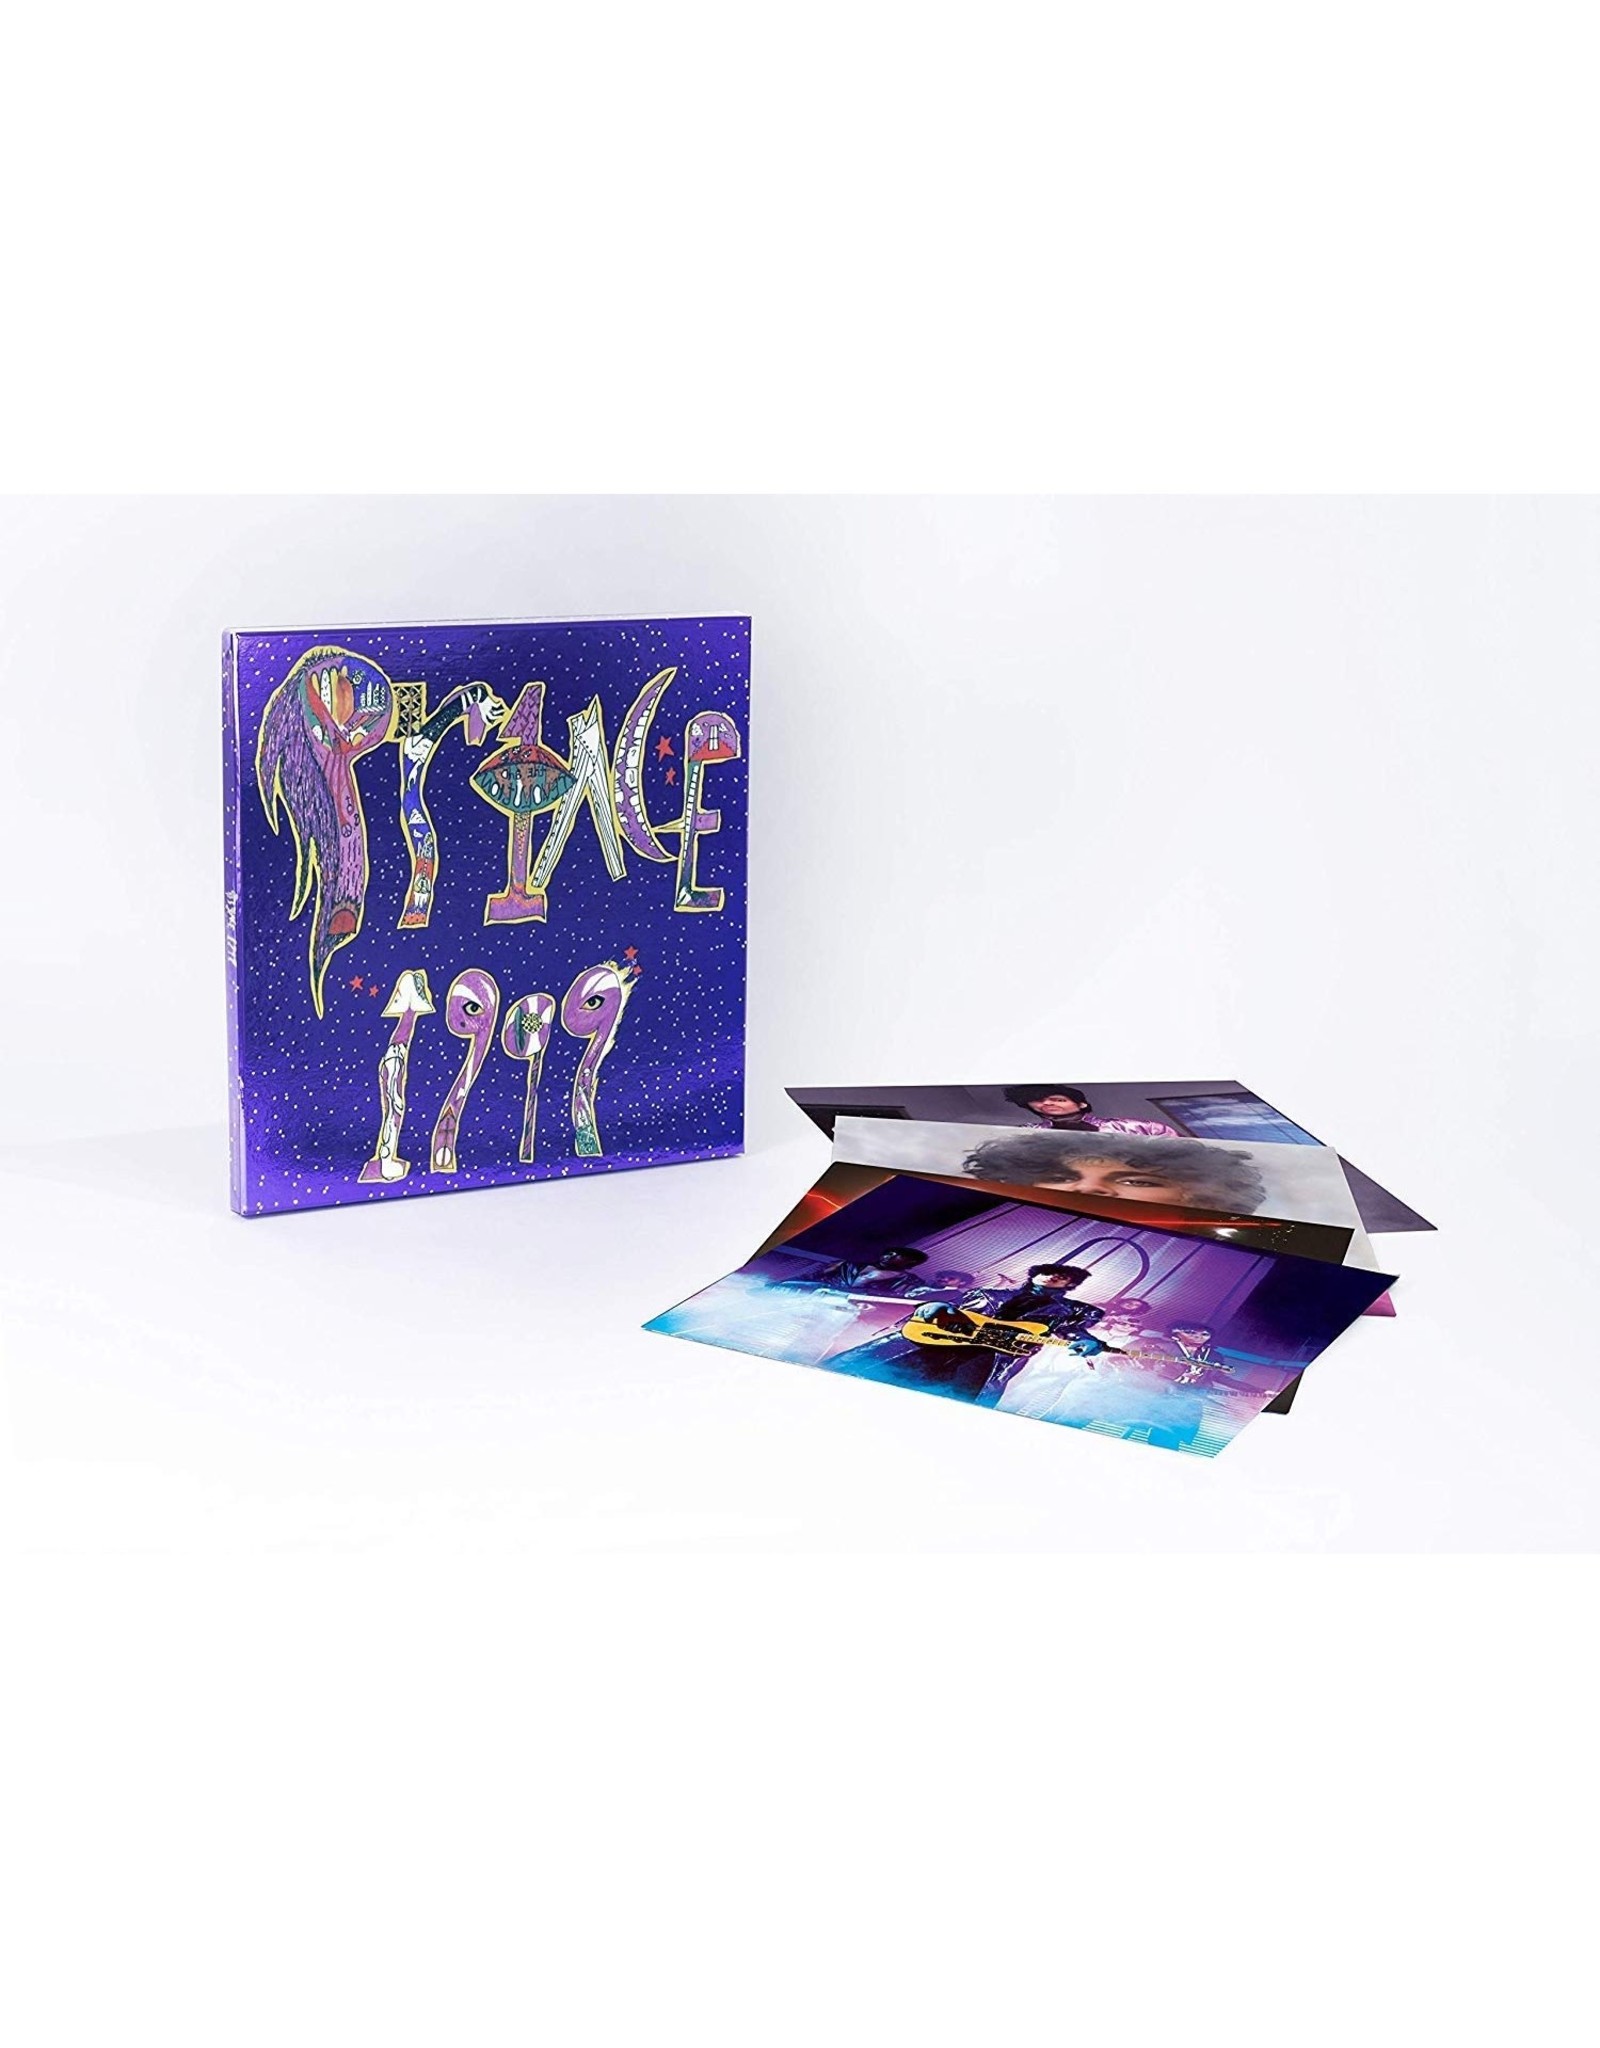 Prince - 1999 (4LP Deluxe Edition)